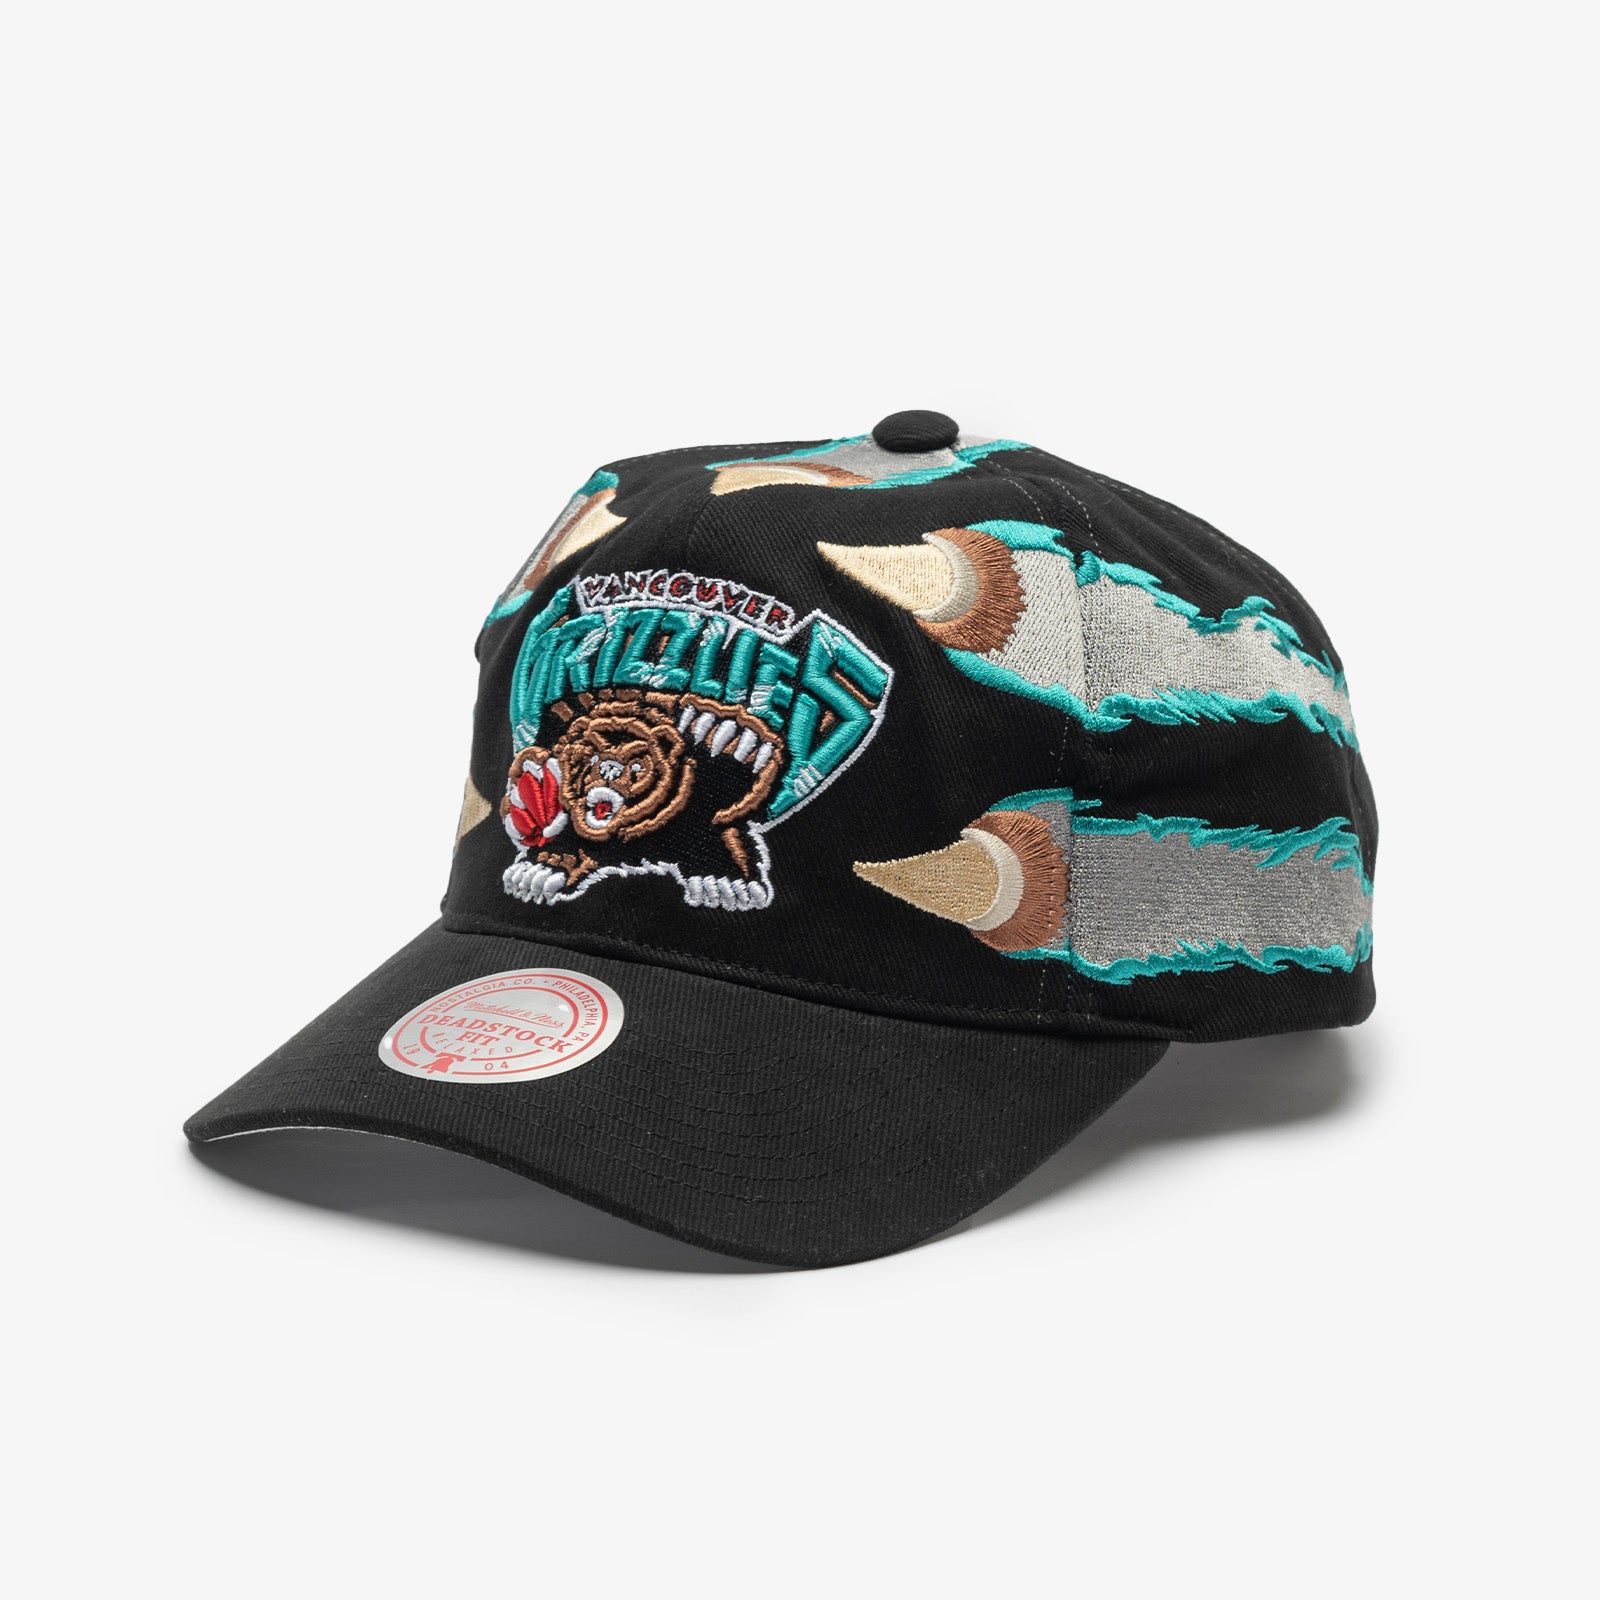 Vancouver Grizzlies Teal/Red Brim Hat by Mitchell & Ness NWT